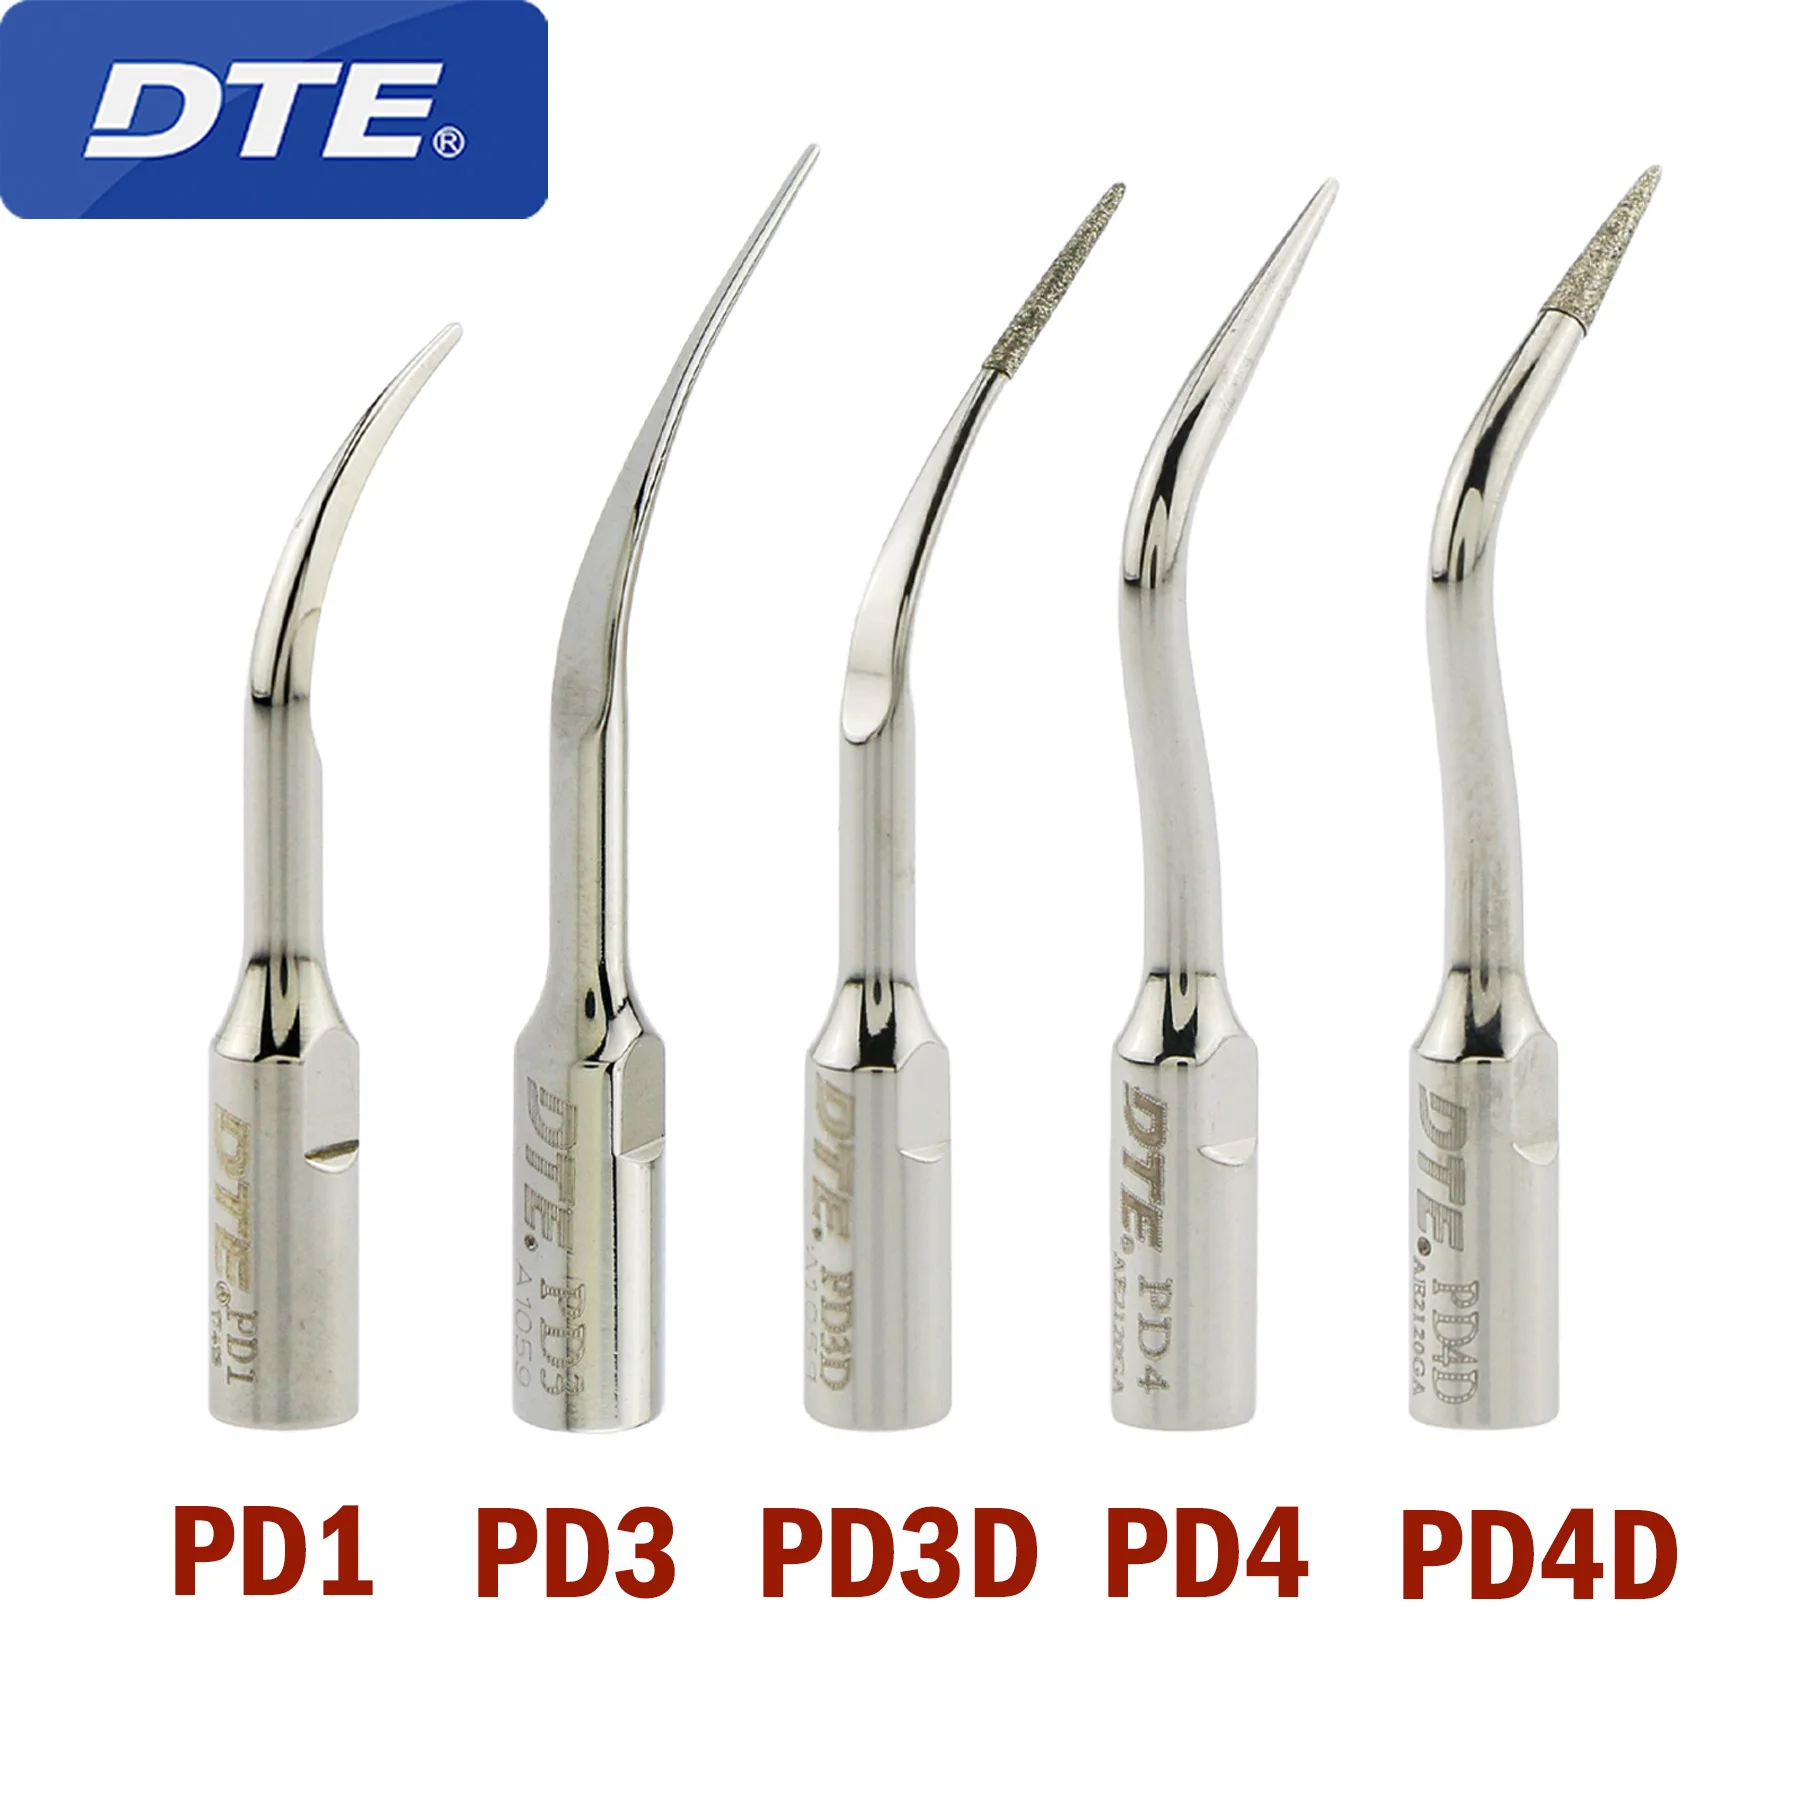 

Woodpecker DTE Dental Ultrasonic Scaler Tips Perio Dental Instruments PD1 PD3 PD3D PD4 PD4D Fit NSK SATELEC ACTEON Tools